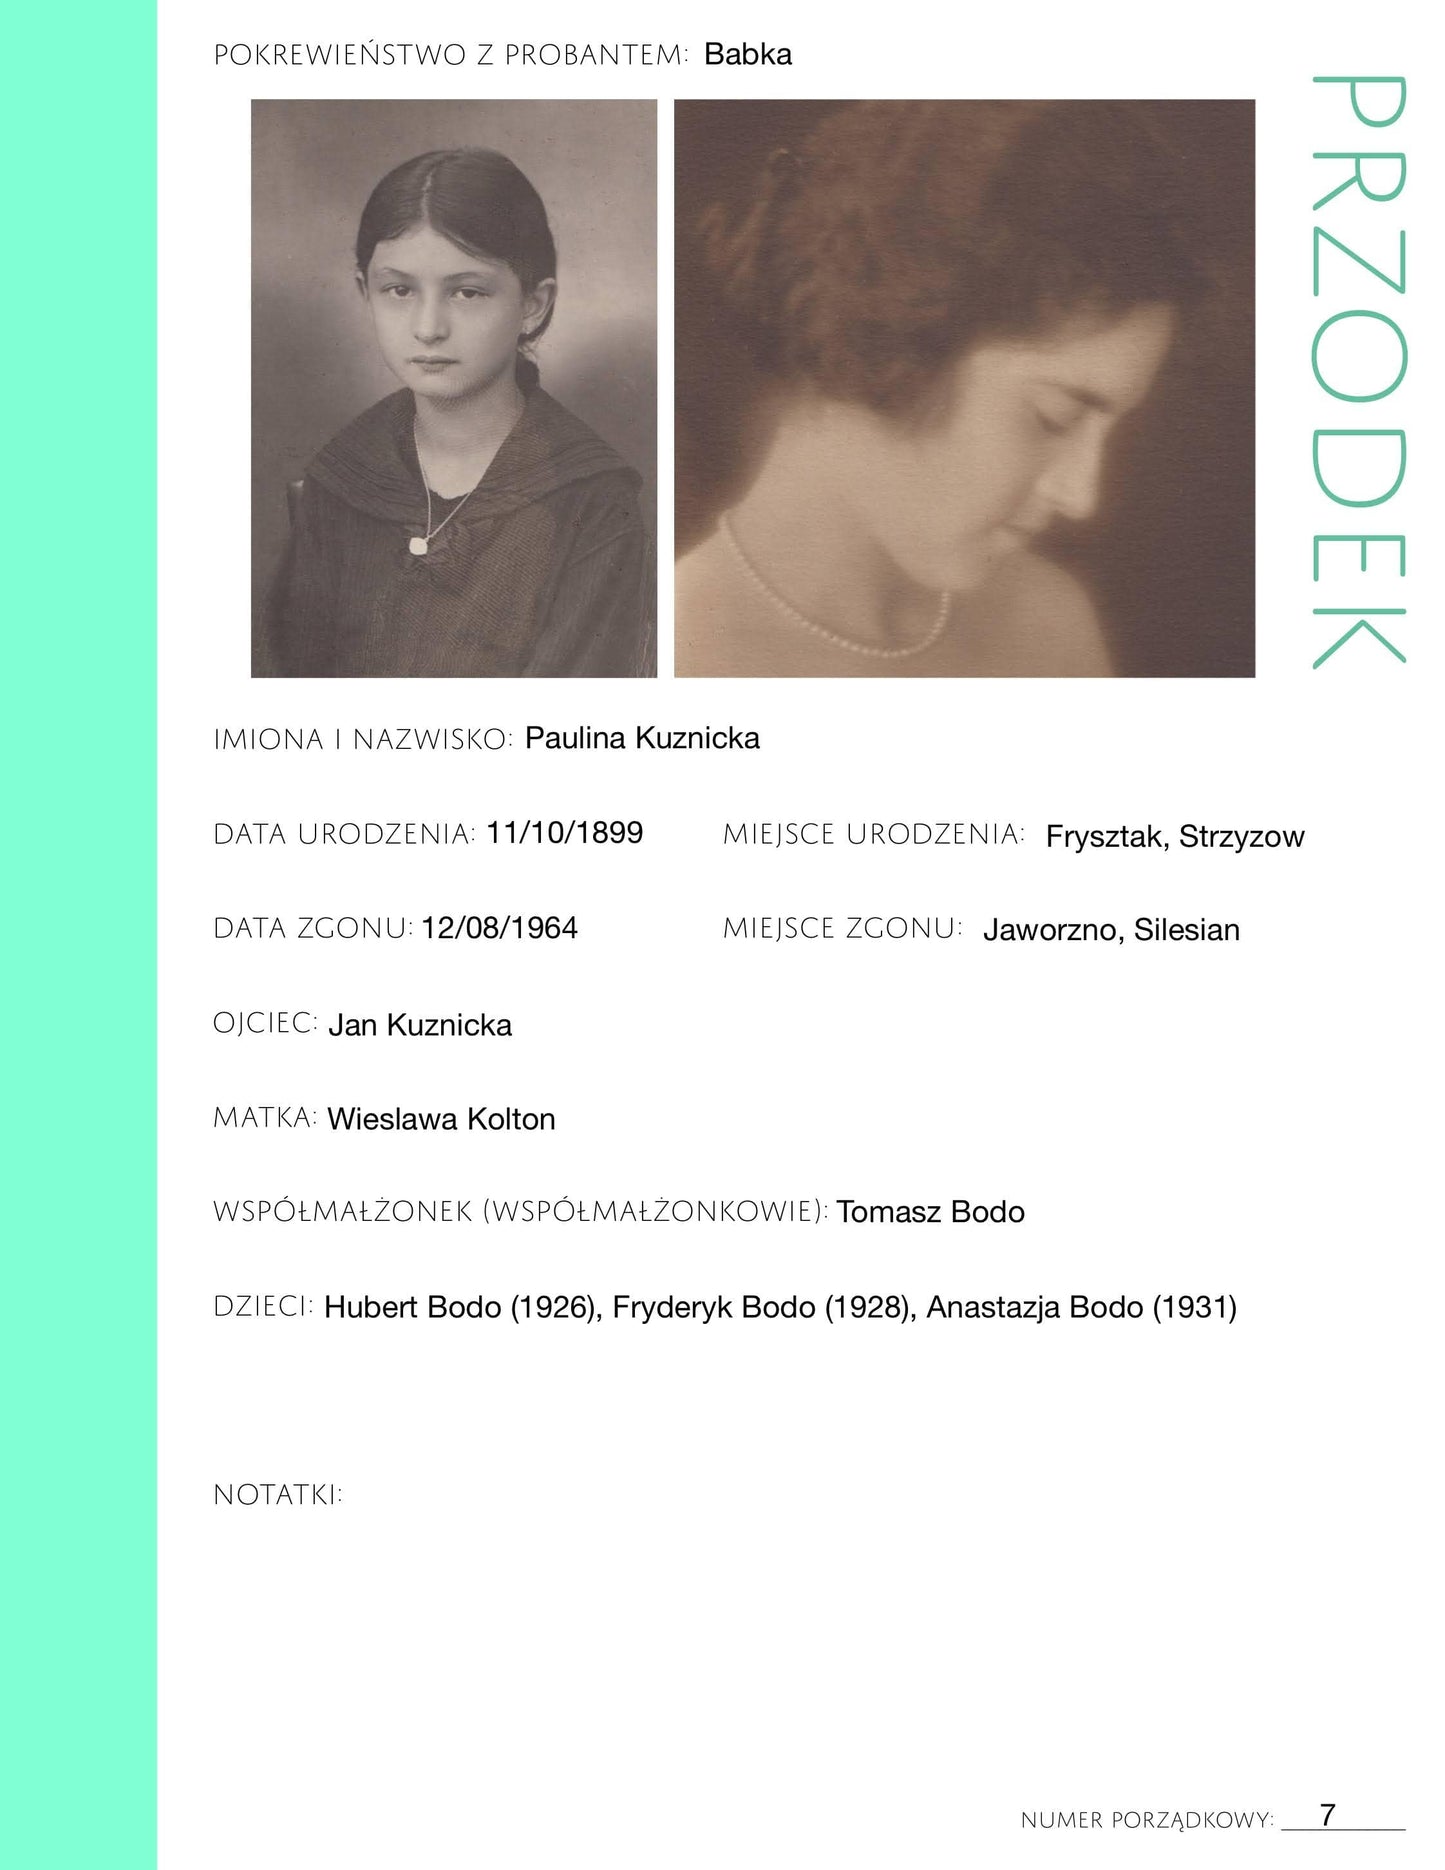 Deluxe Genealogy Pages in Polish /// 200-Page Family History Bundle - Aquamarine (Digital Download)